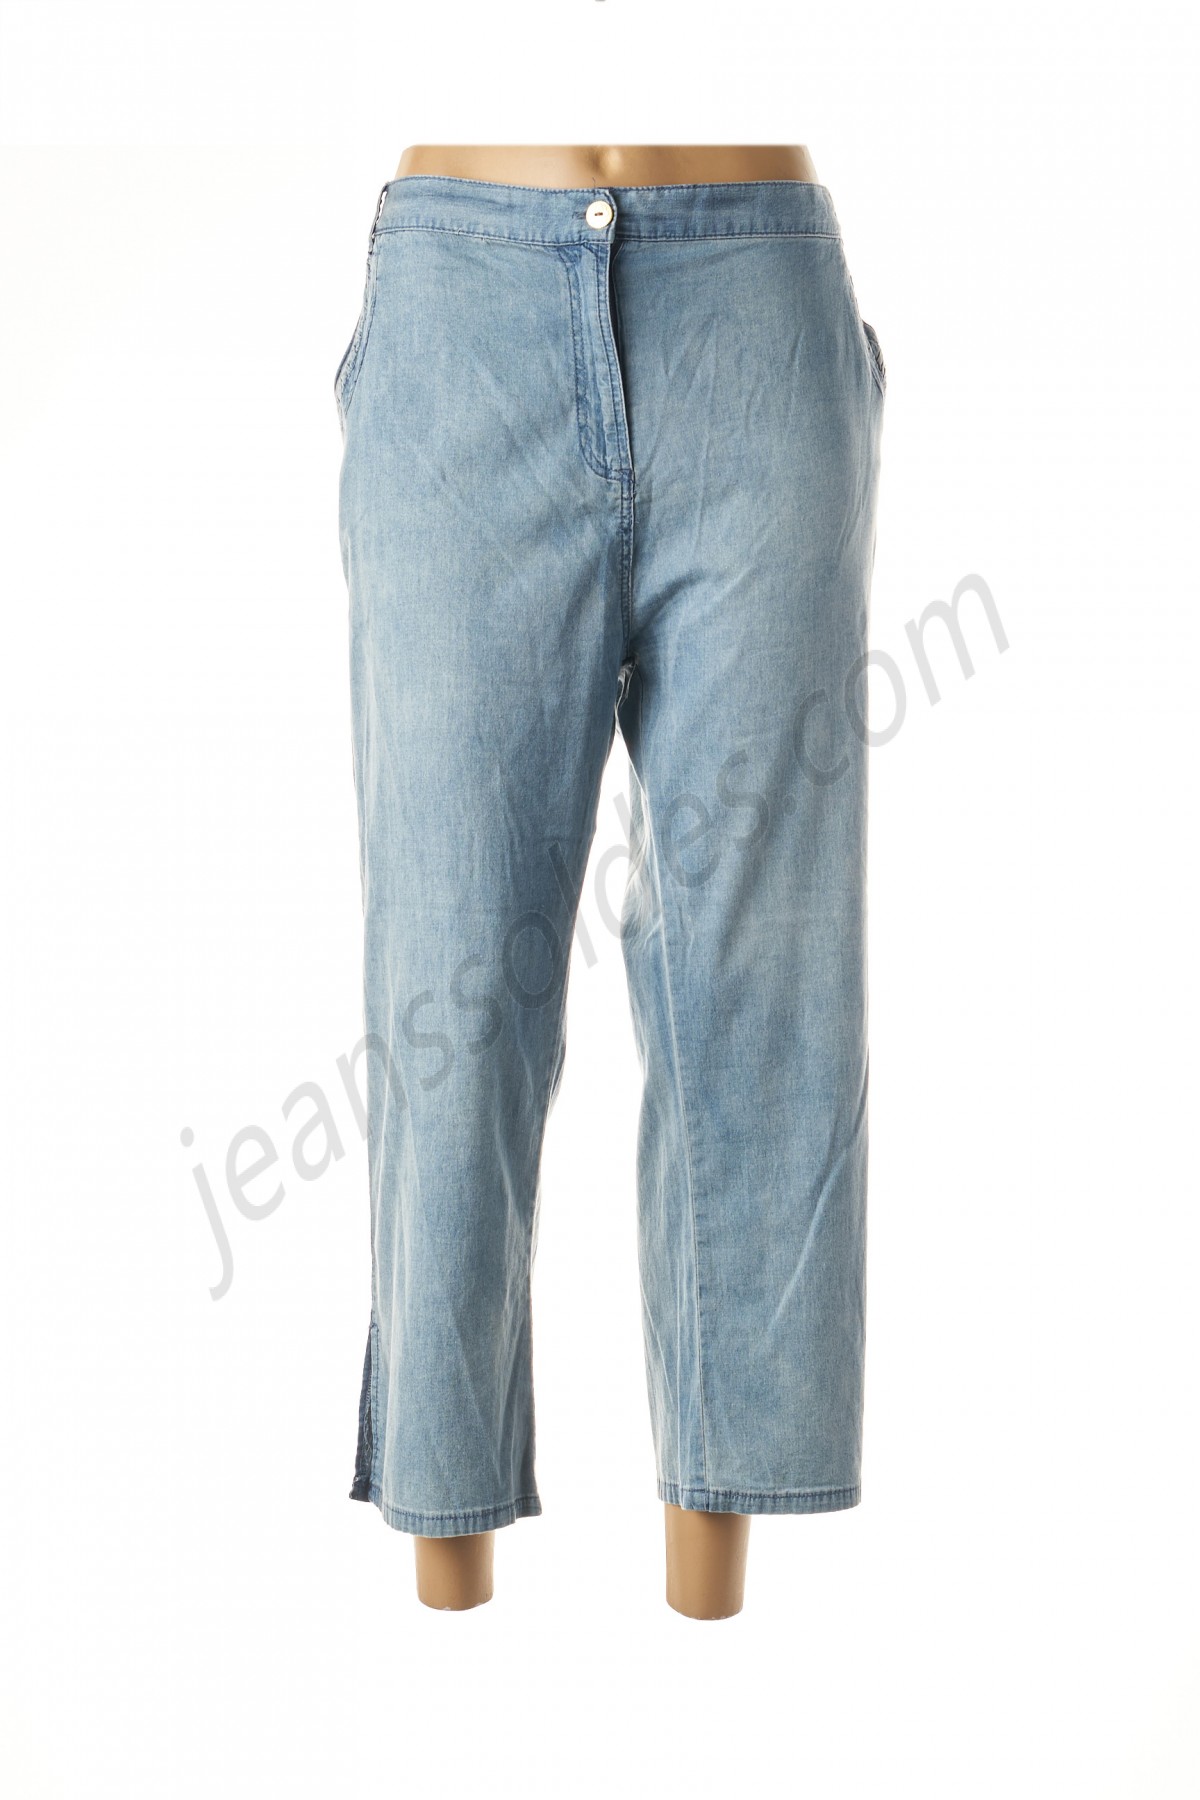 be the queen-Jeans coupe slim prix d’amis - -0